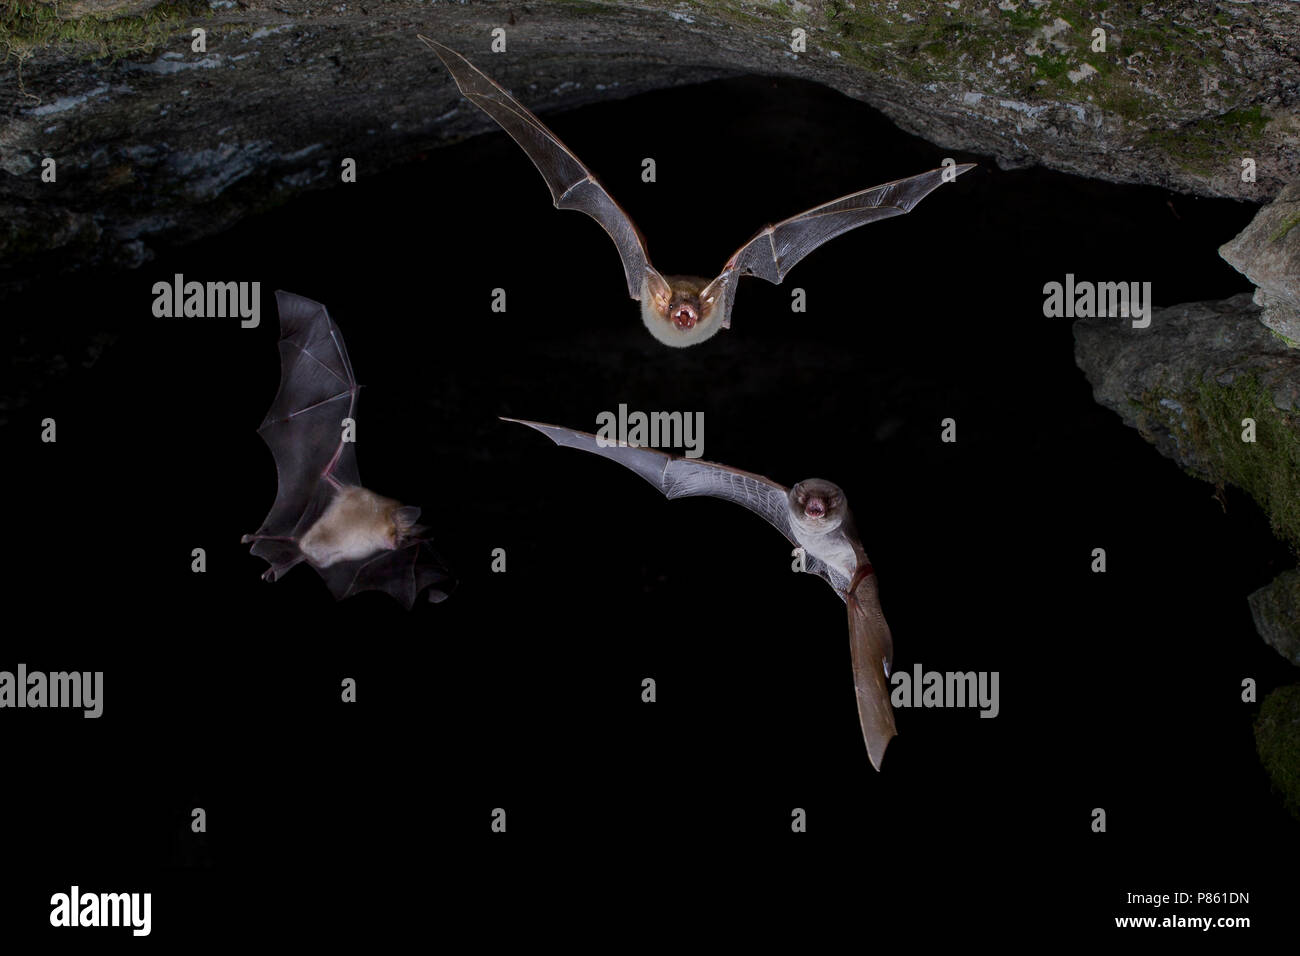 Vale Vleermuis verlaat grot, Greater Mouse-eared Bat leaving cave Stock Photo